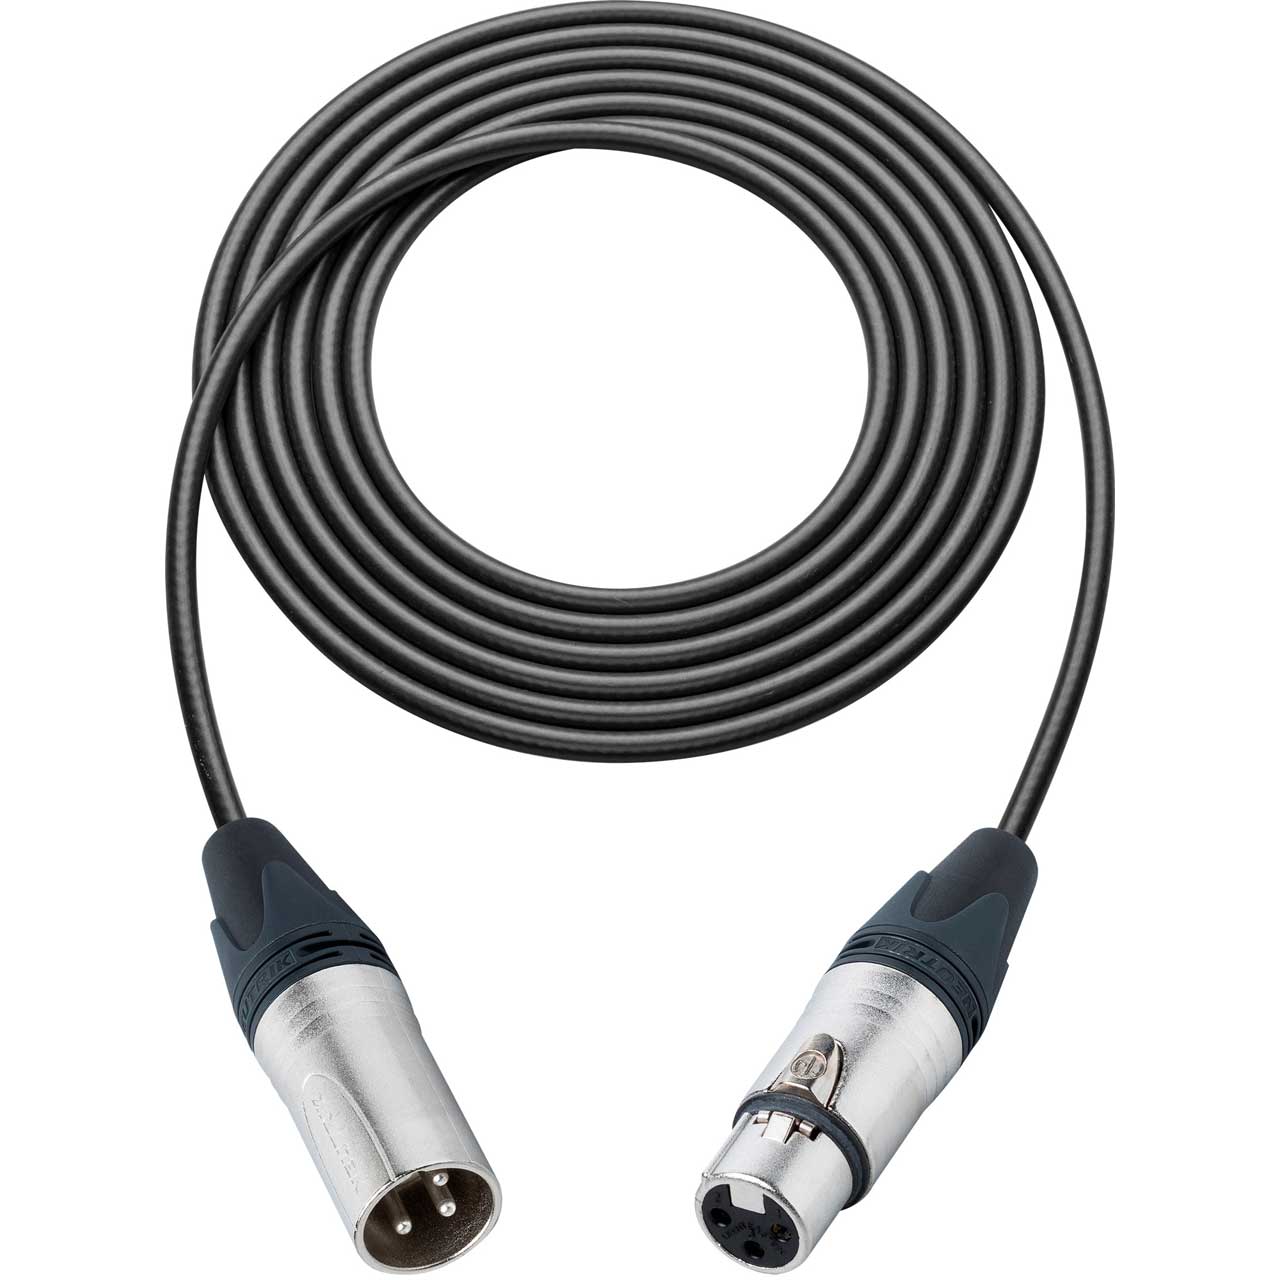 Canare StarQuad Microphone Cable 3Pin XLR Male to Female 100 Foot Black